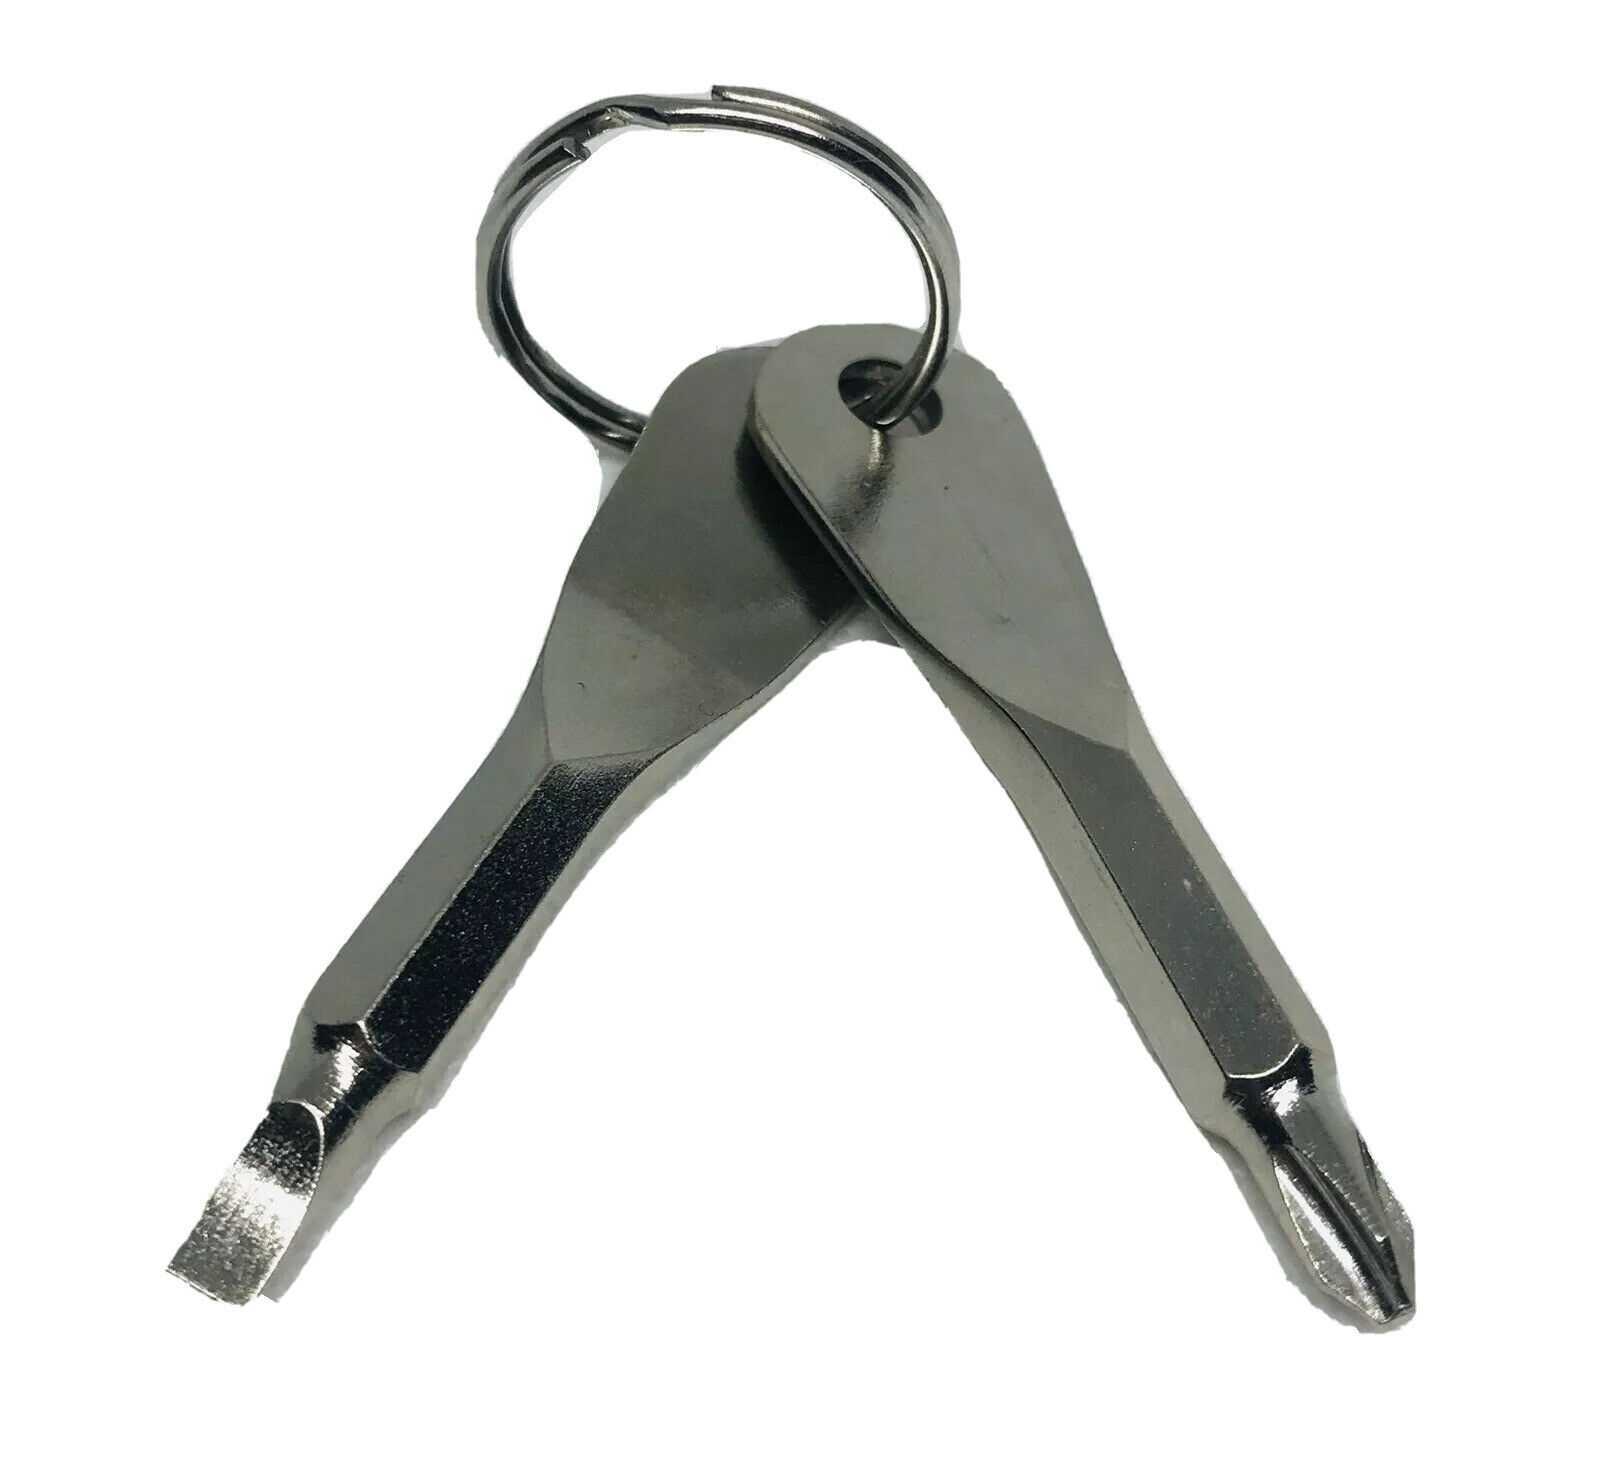 Silver Screwdriver Stainless Steel Key Chain Ring Pocket Outdoor Multi Tool